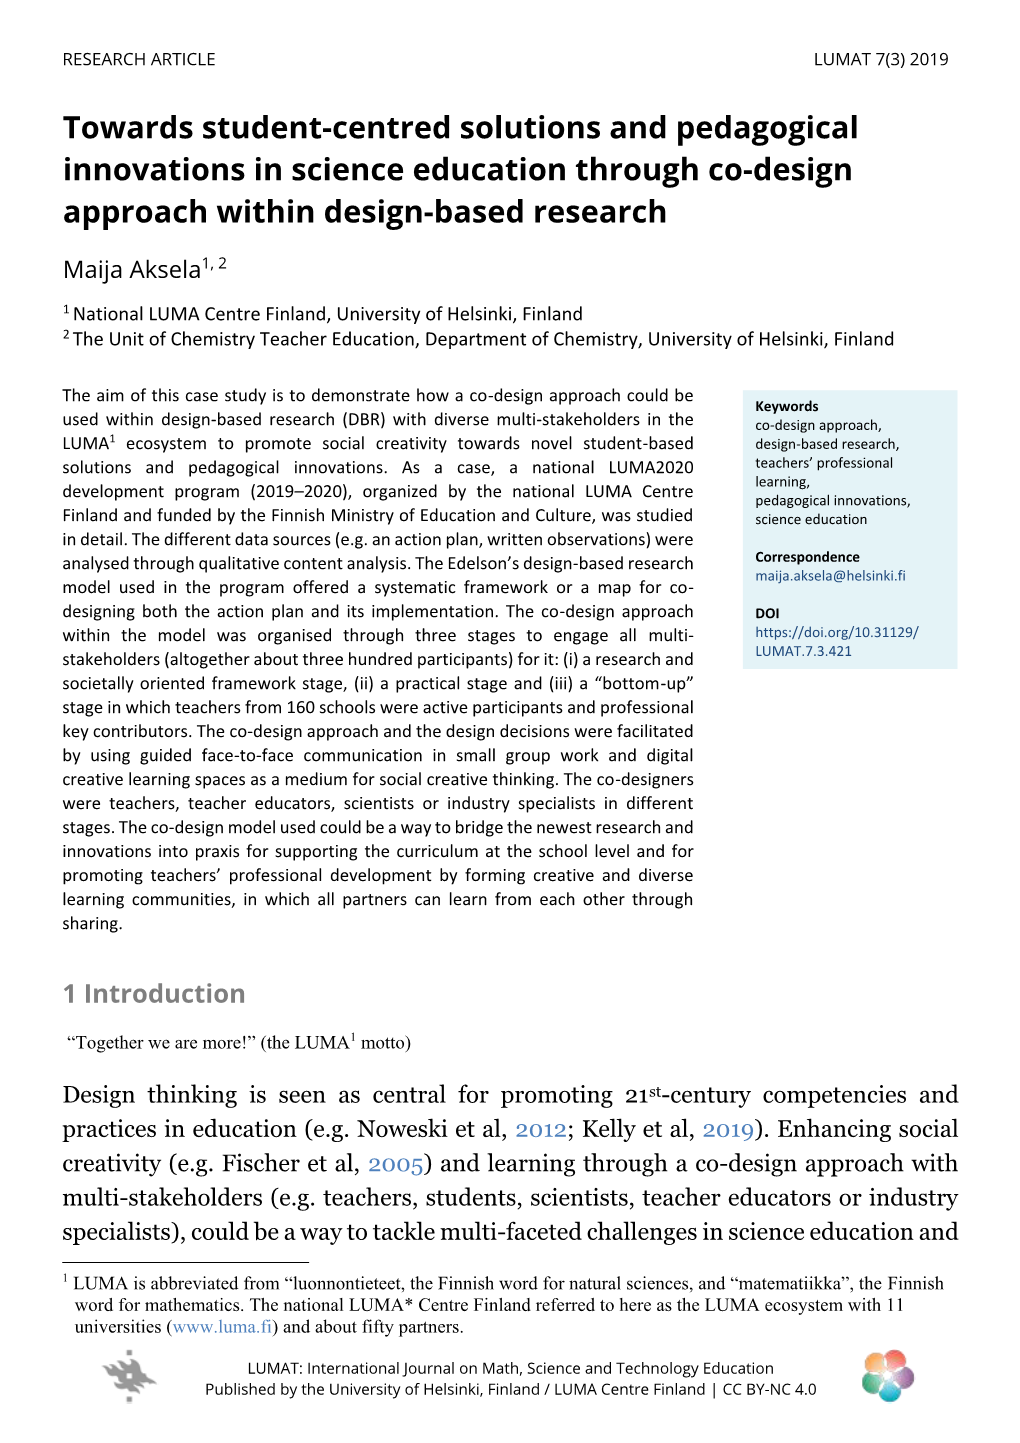 Towards Student-Centred Solutions and Pedagogical Innovations in Science Education Through Co-Design Approach Within Design-Based Research